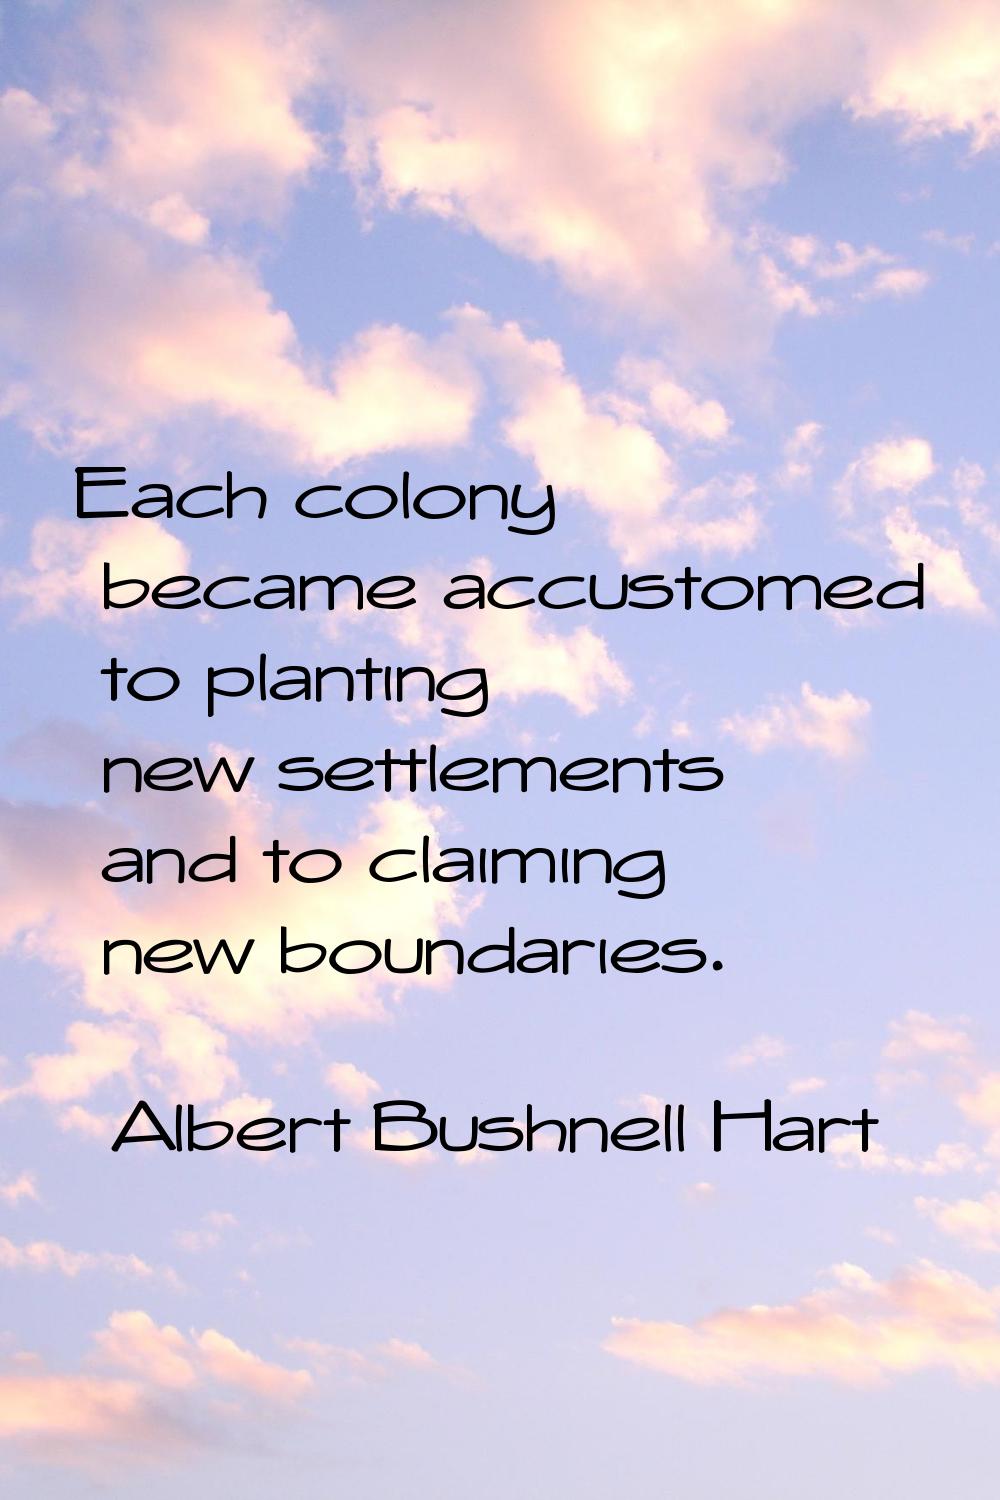 Each colony became accustomed to planting new settlements and to claiming new boundaries.